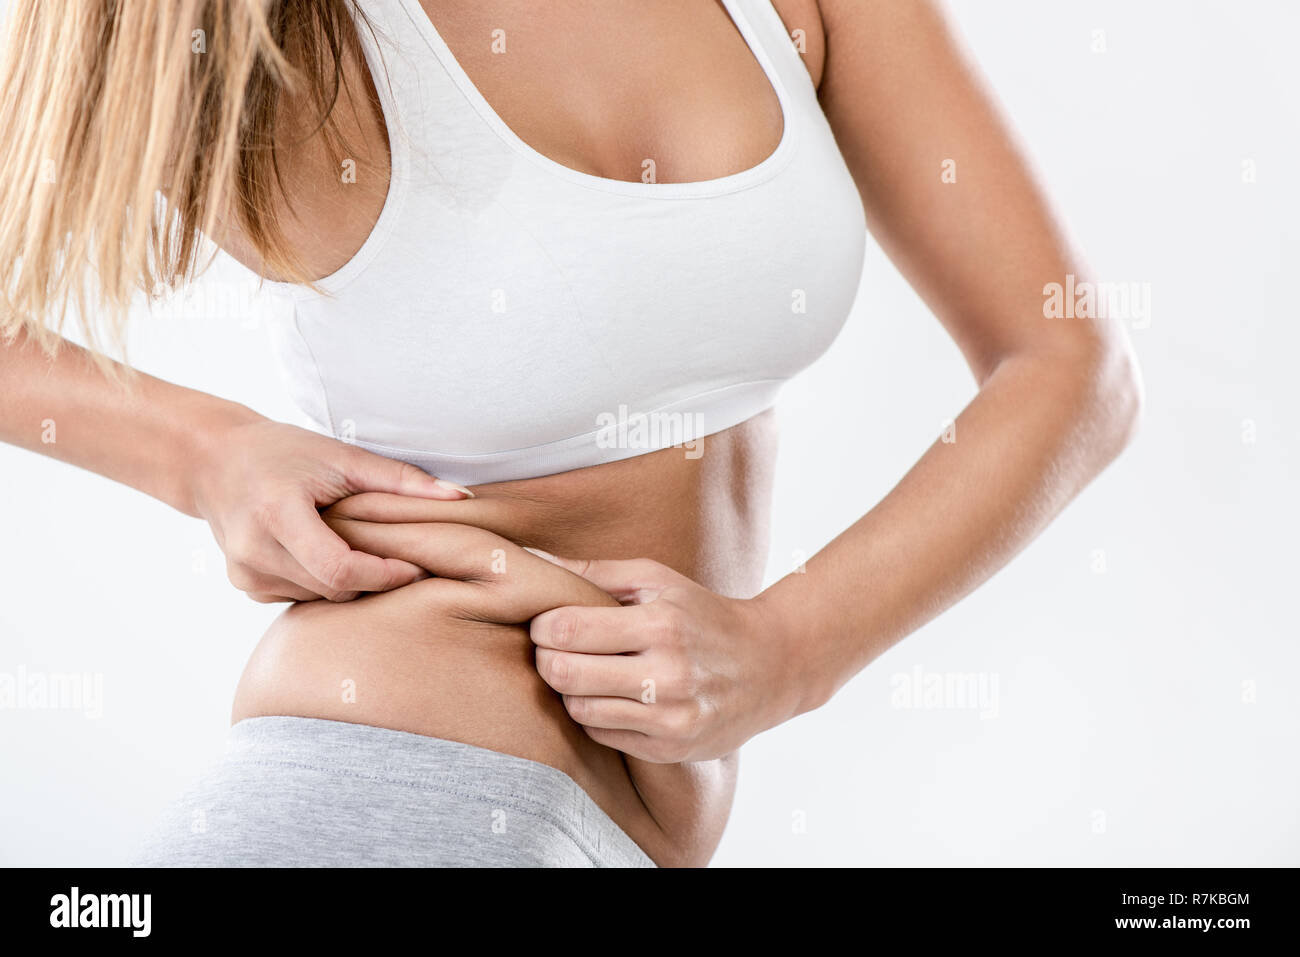 Woman pinching waist and checking her body fat. Close-up Stock Photo